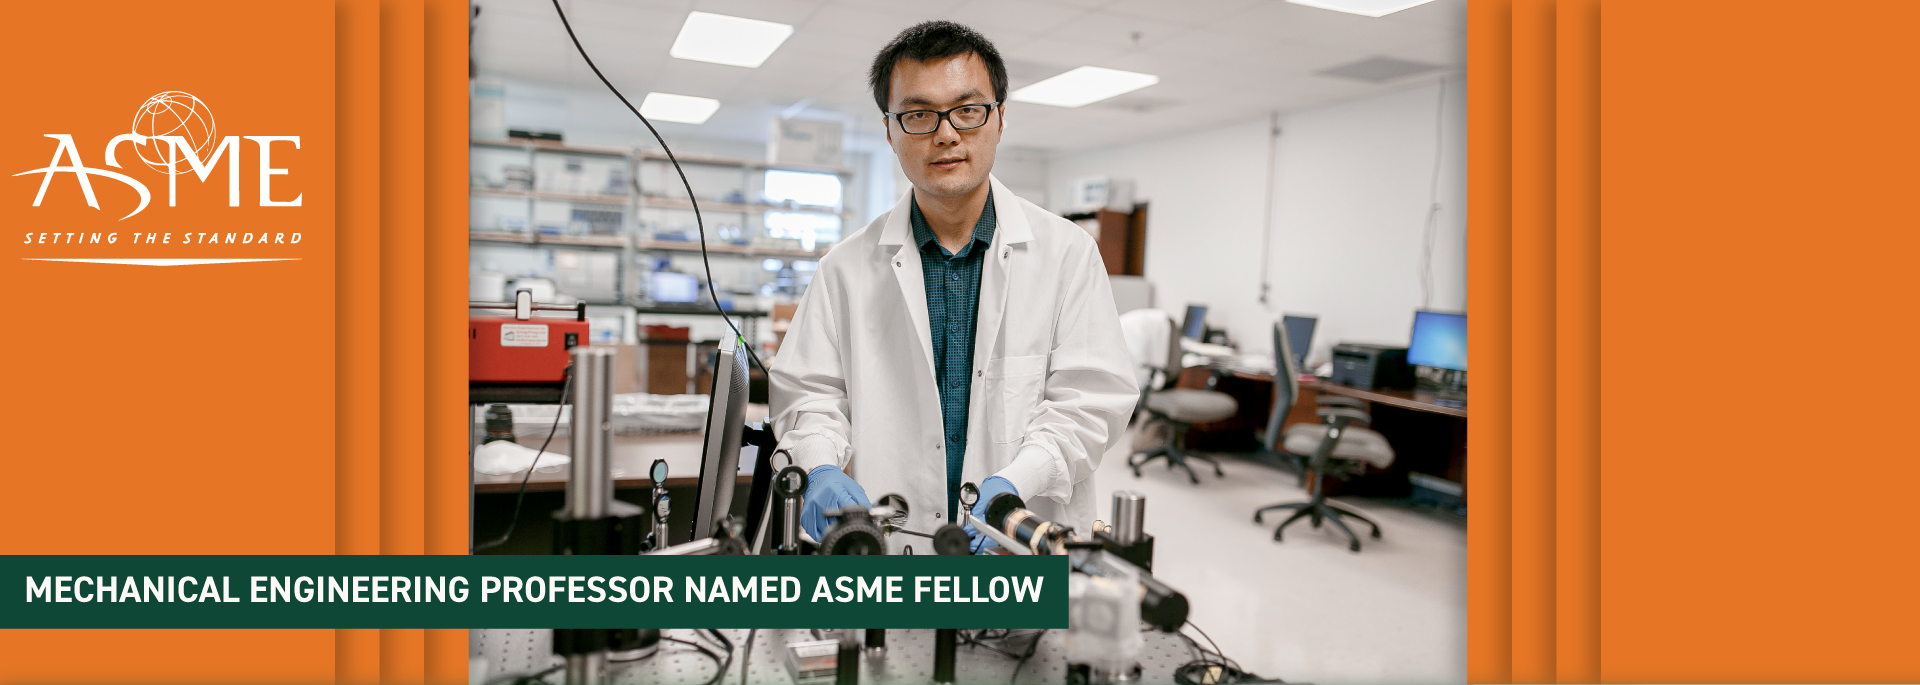 Dr. Zhenpeng Qin and collaborators have developed two new tools to control the release of neuropeptides and study how they affect behavior in real time.